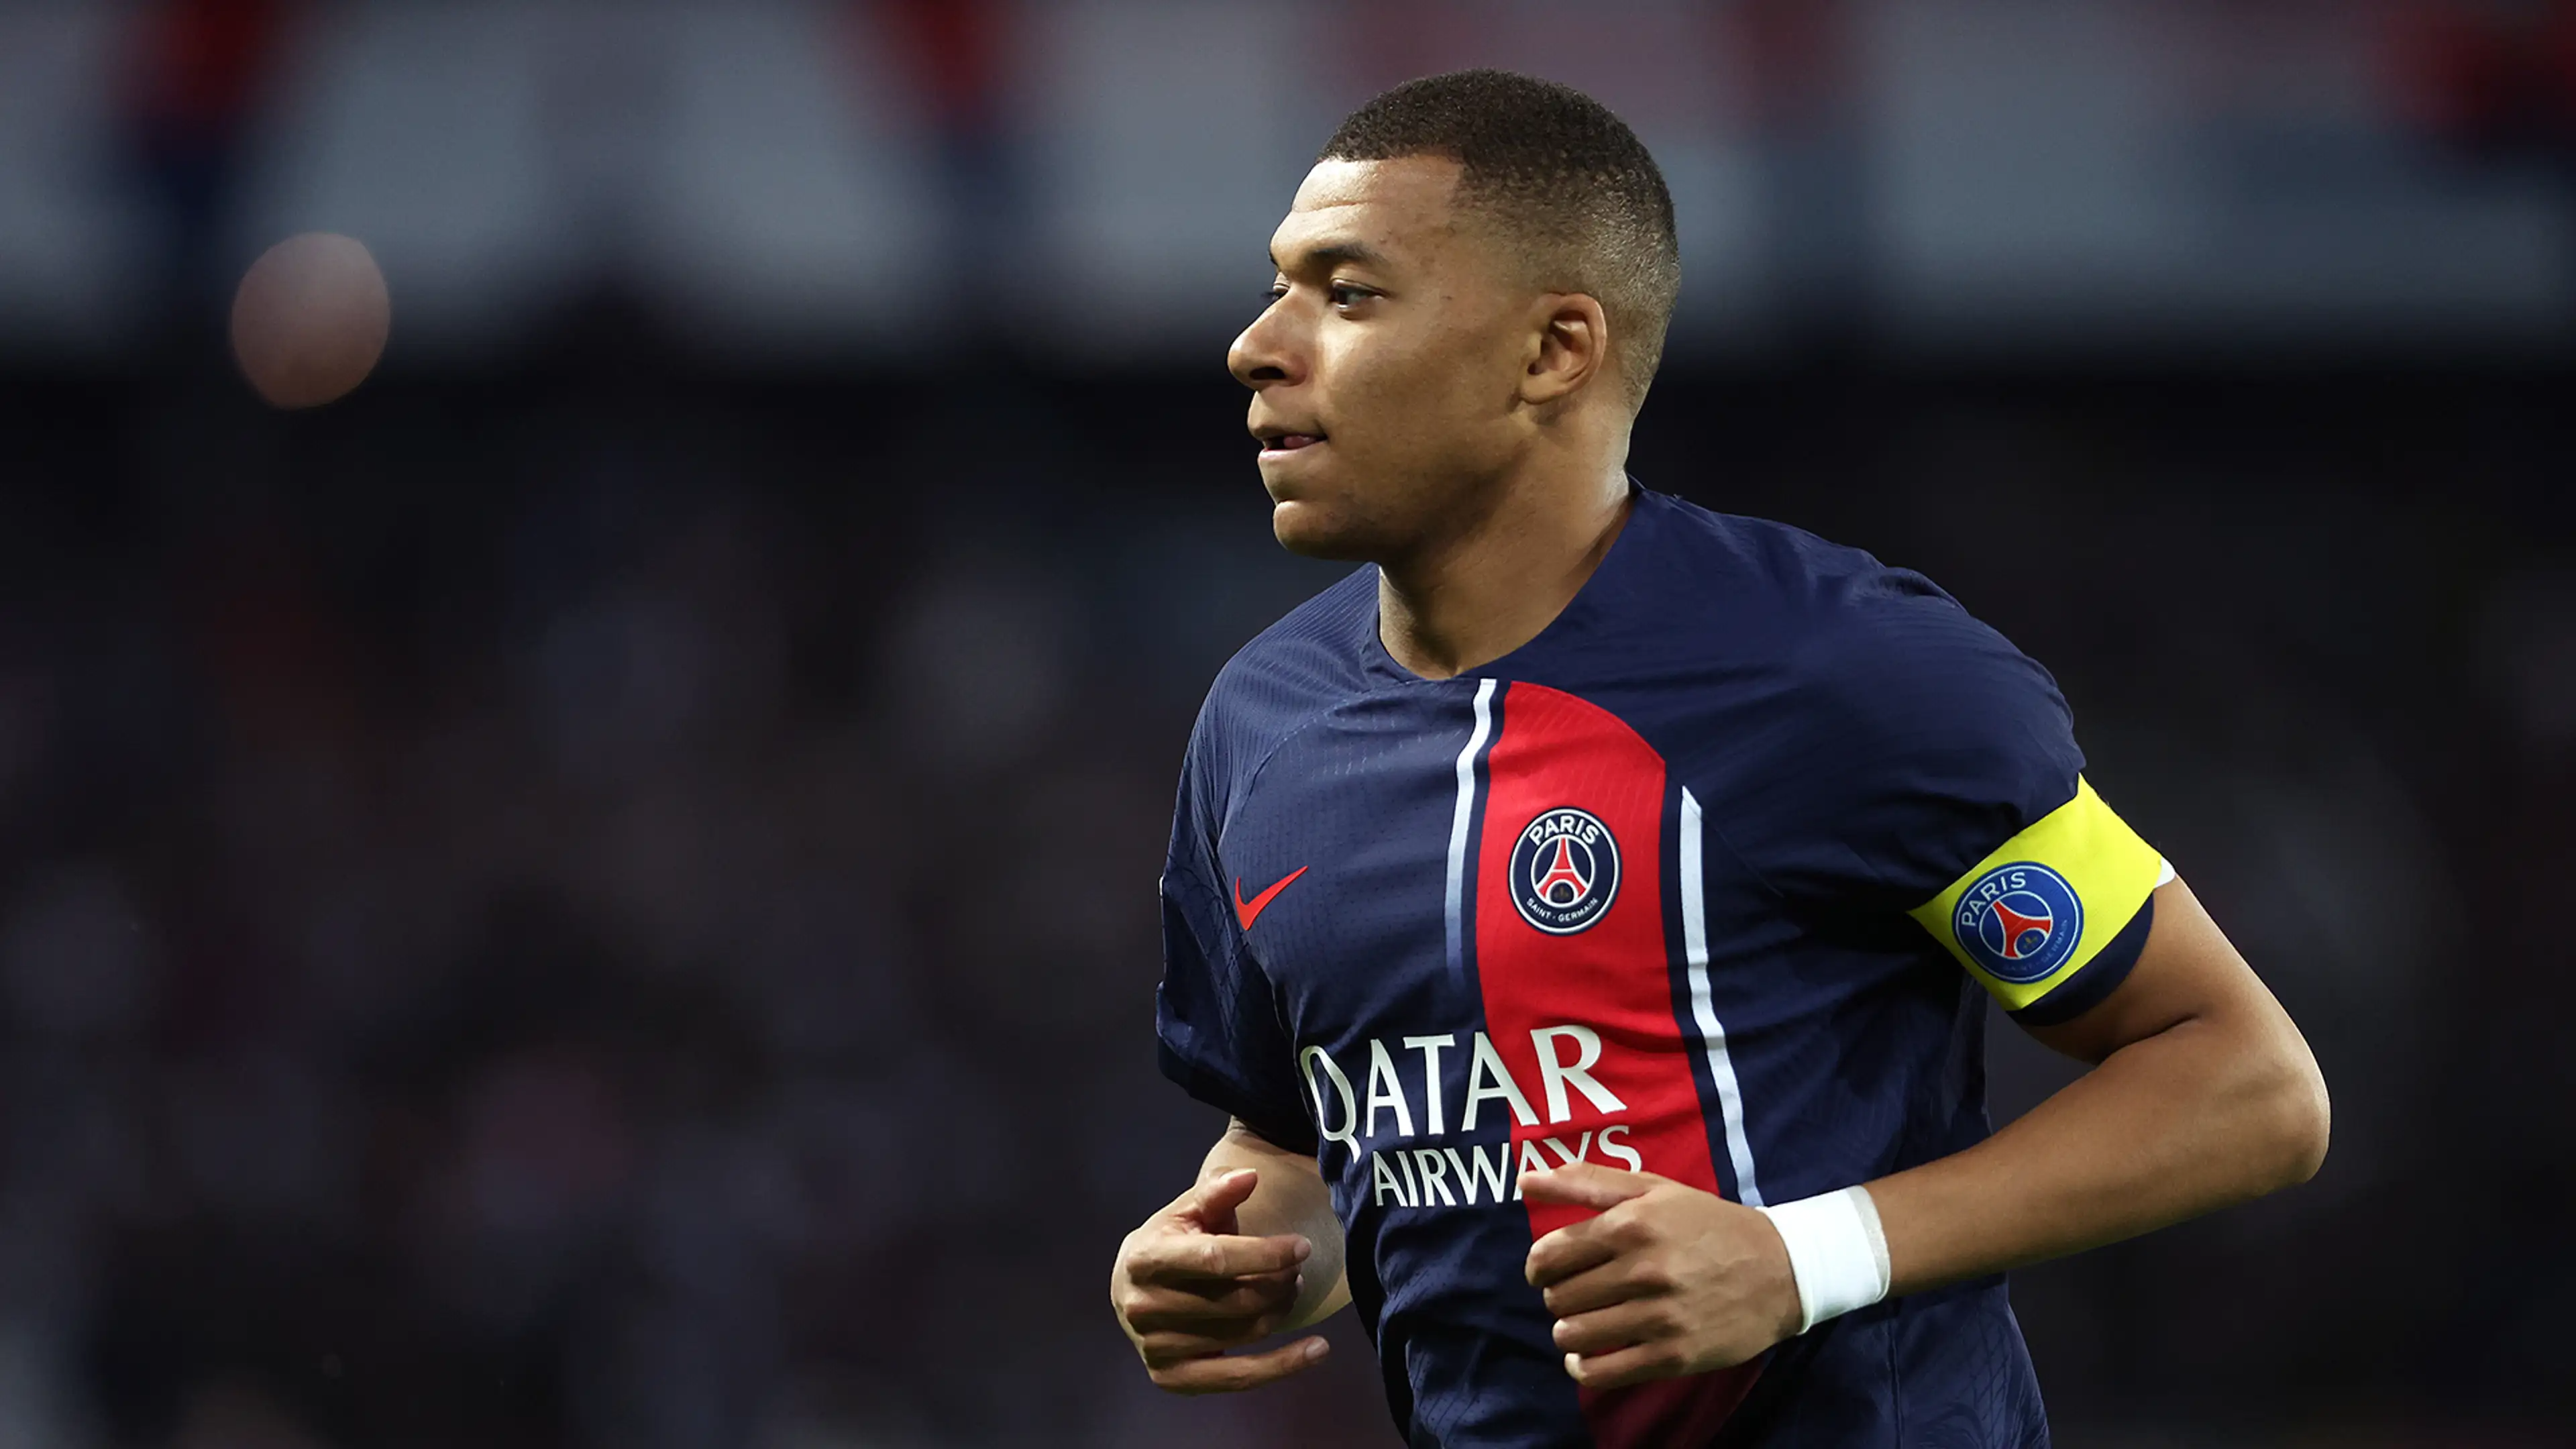 Source: Liverpool Wants To Sign Mbappé From PSG On Loan